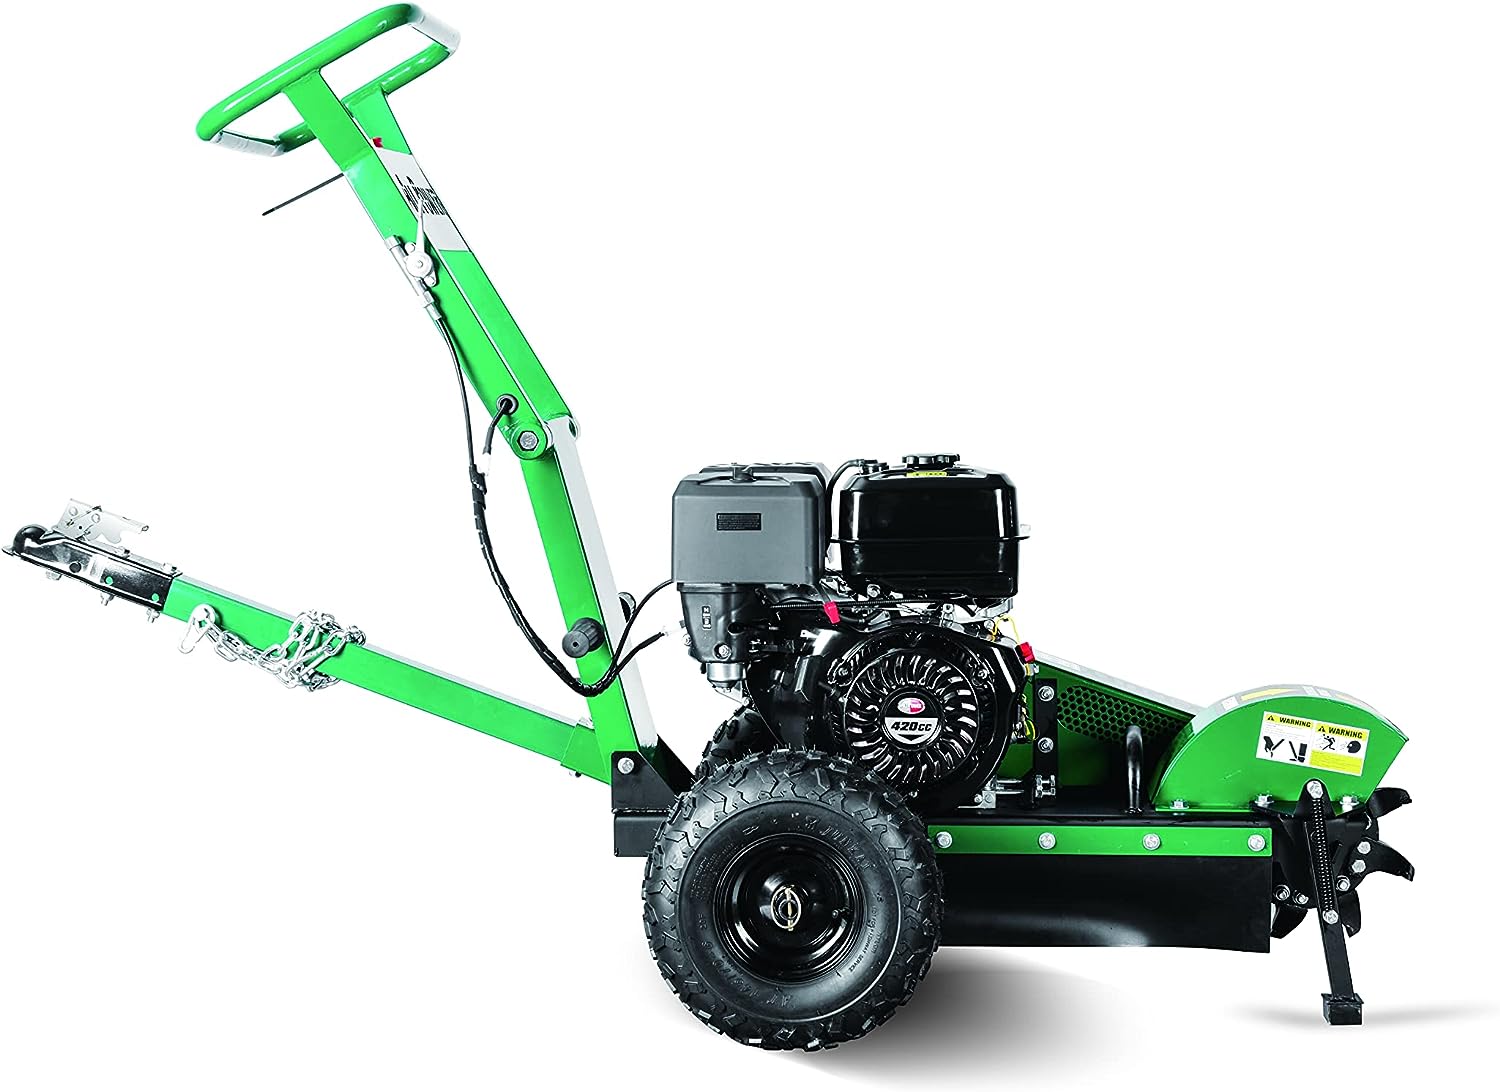 All Power, Stump Grinder for Tree Stump Removal with 12" Blades - $1100